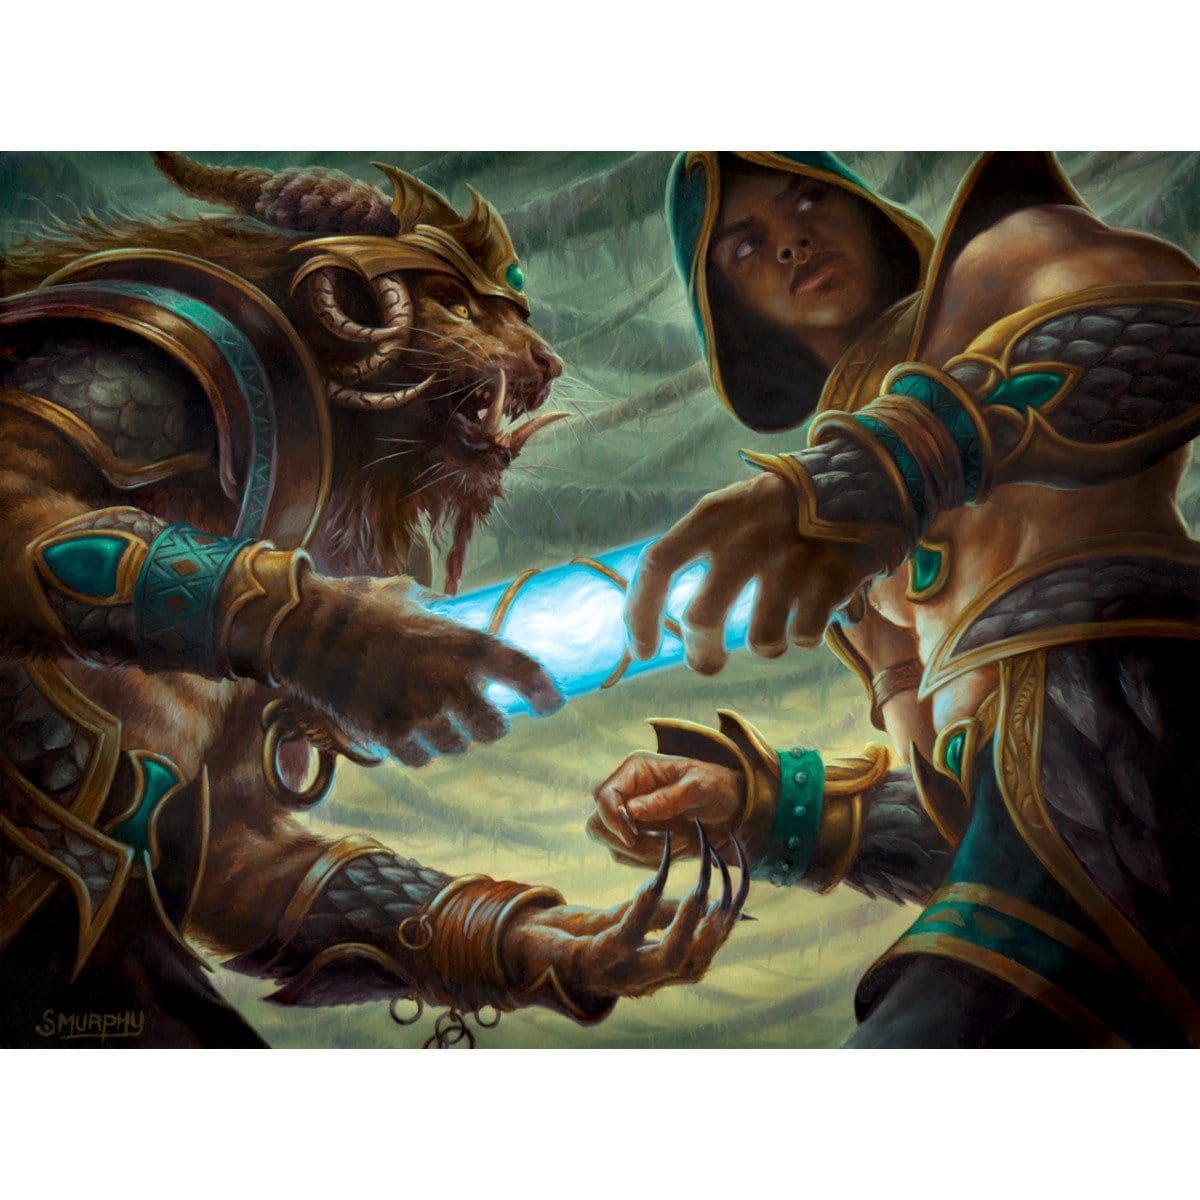 Dark Deal Print - Print - Original Magic Art - Accessories for Magic the Gathering and other card games